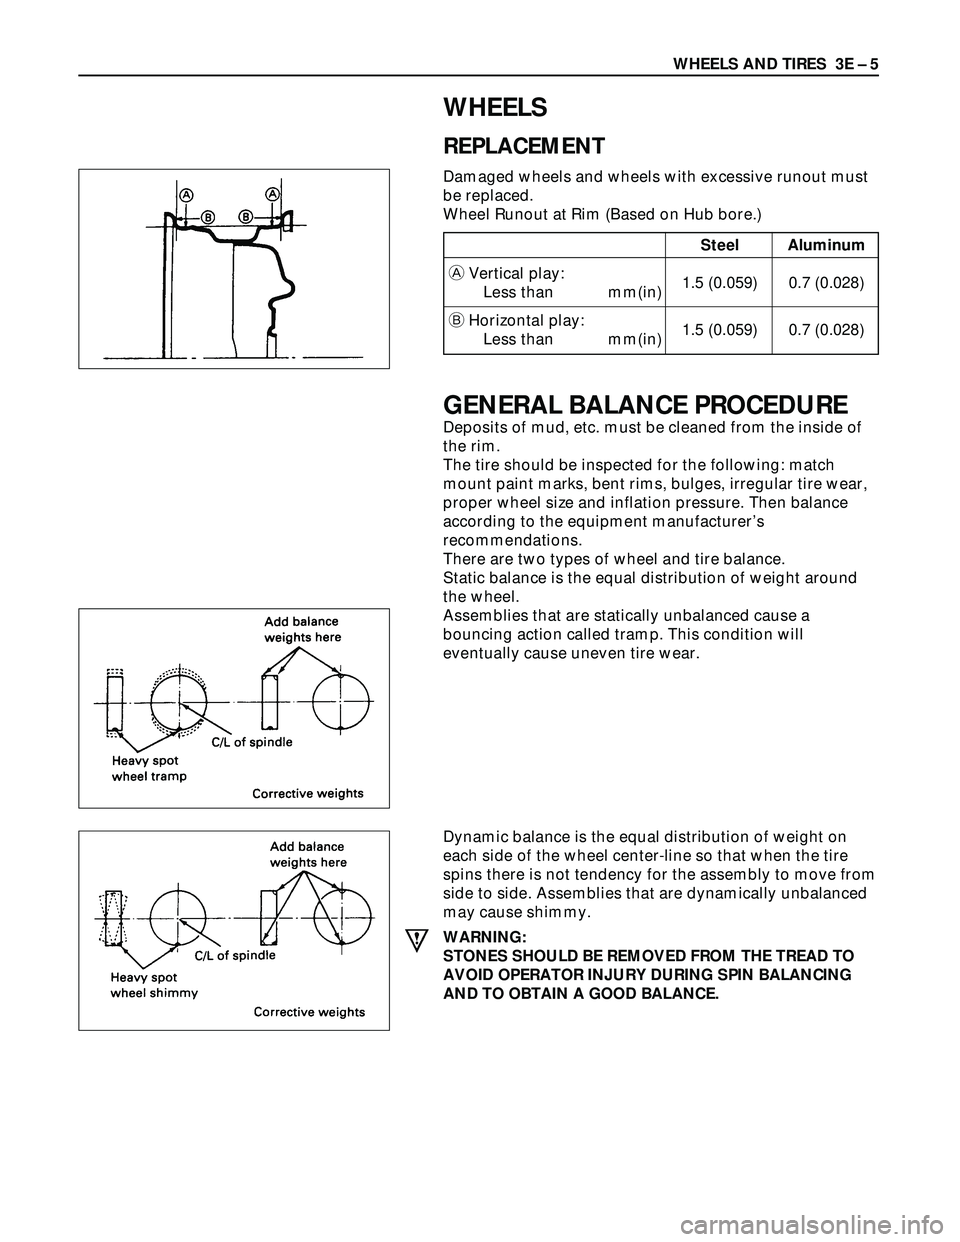 ISUZU TROOPER 1998  Service Owners Manual WHEELS AND TIRES  3E – 5
WHEELS
REPLACEMENT
Damaged wheels and wheels with excessive runout must
be replaced.
Wheel Runout at Rim (Based on Hub bore.)
GENERAL BALANCE PROCEDURE
Deposits of mud, etc.